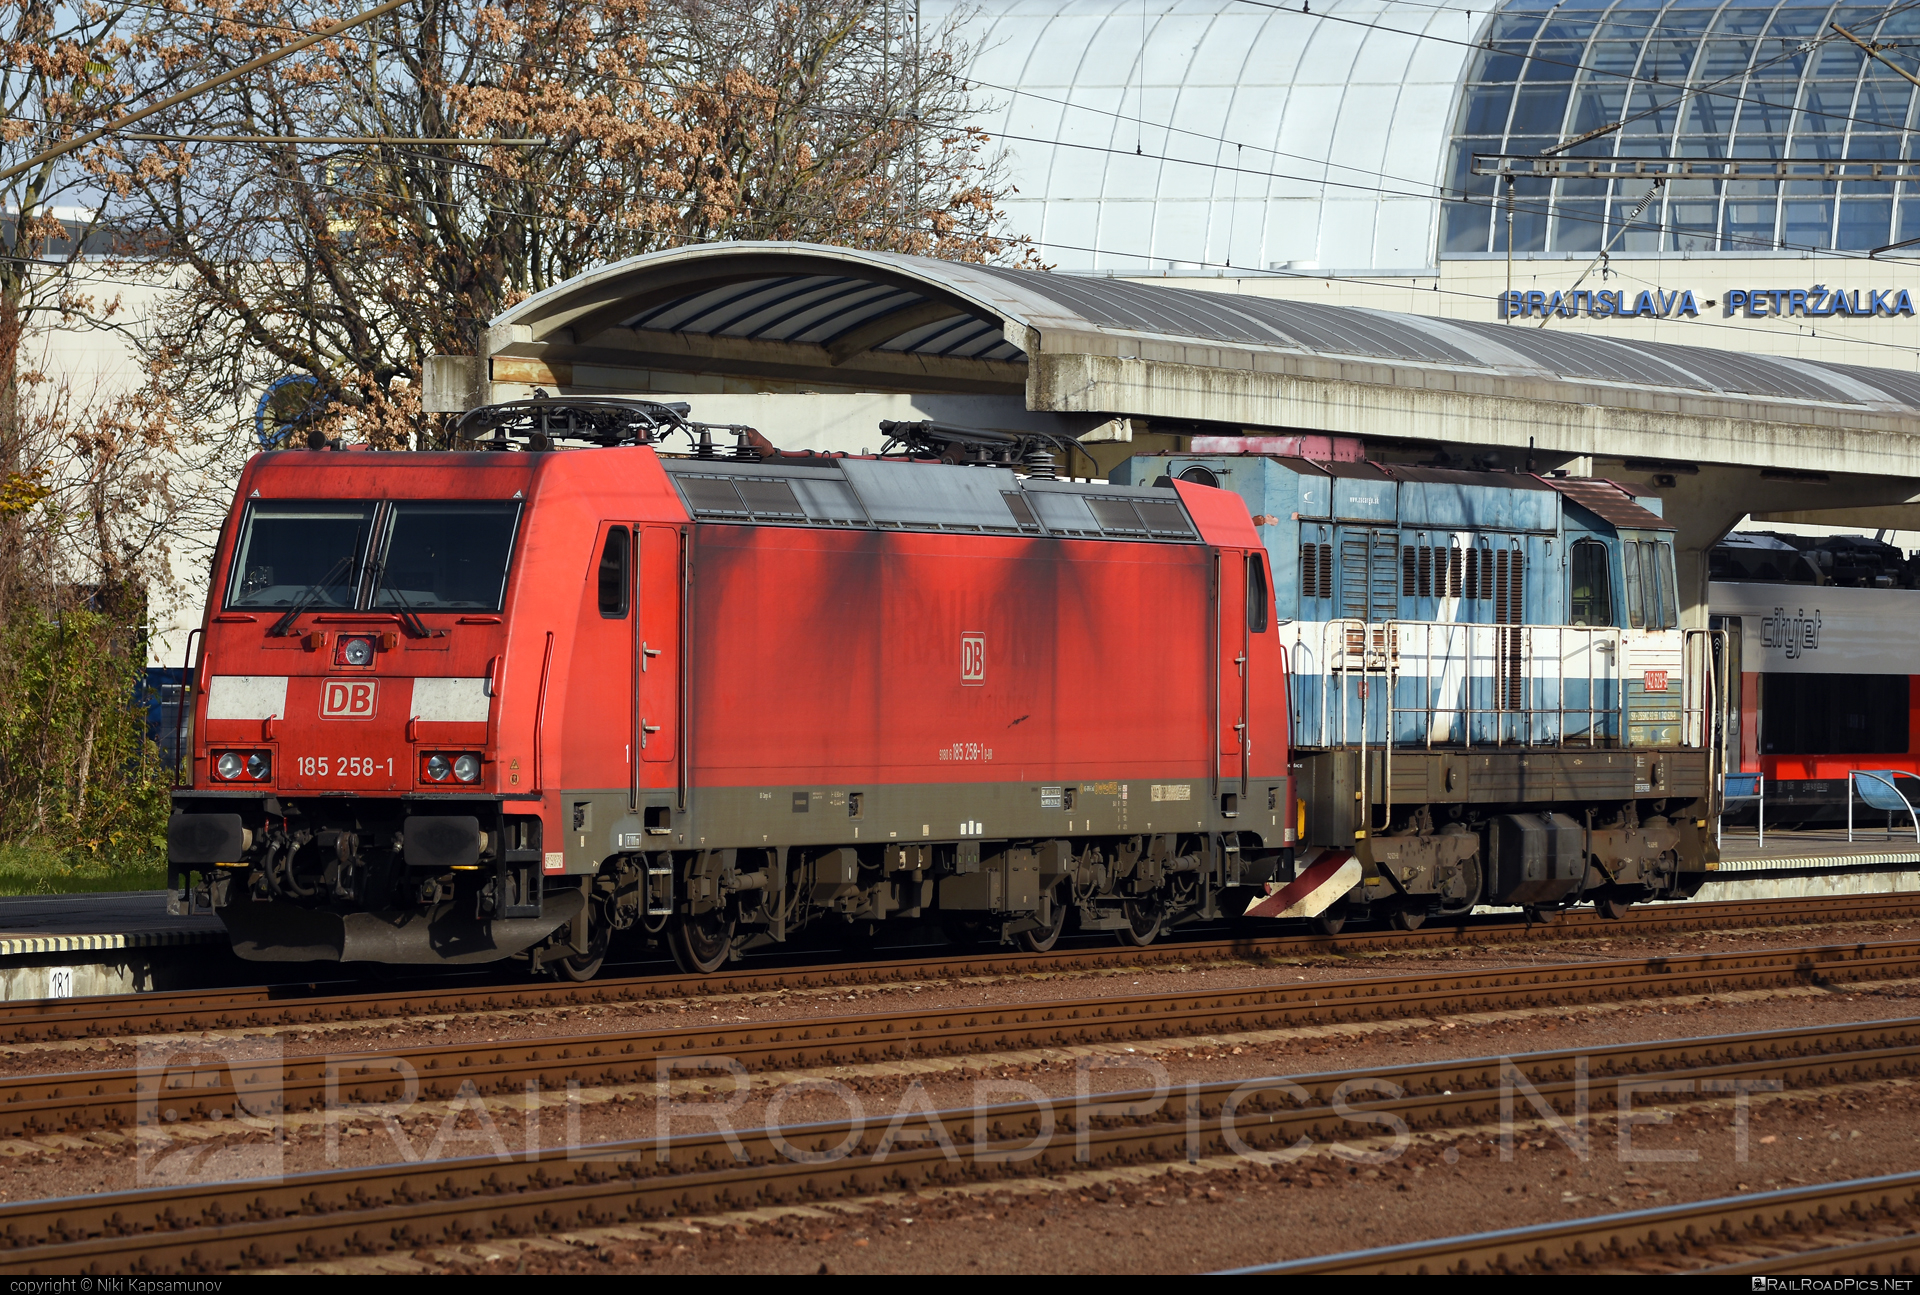 Bombardier TRAXX F140 AC2 - 185 258-1 operated by DB Cargo AG #bombardier #bombardiertraxx #db #dbcargo #dbcargoag #deutschebahn #traxx #traxxf140 #traxxf140ac #traxxf140ac2